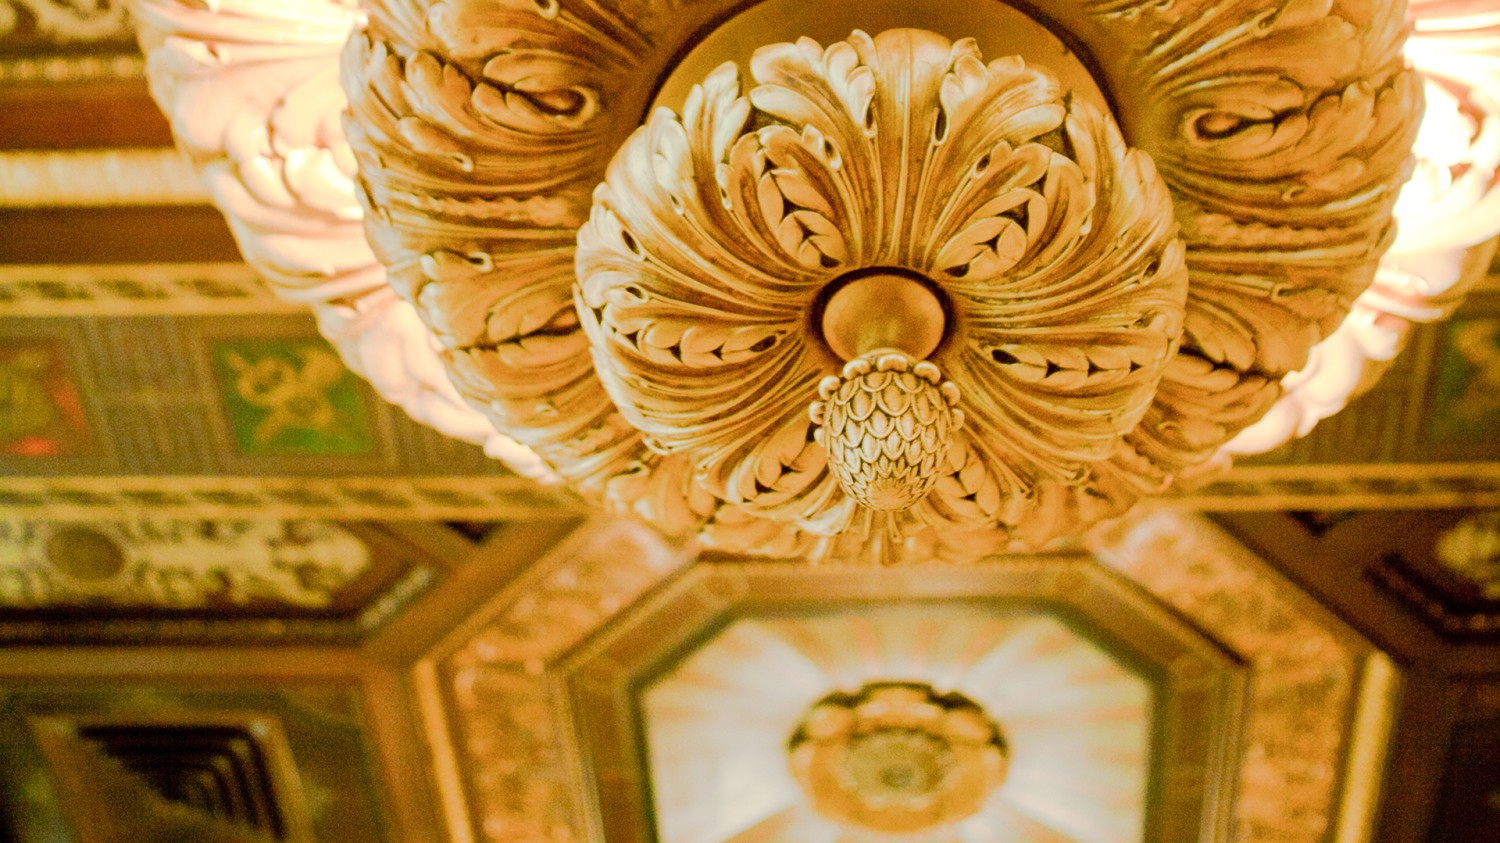 Amway Grand_Detail Shot_Chandelier_Gold Ceiling_Wood